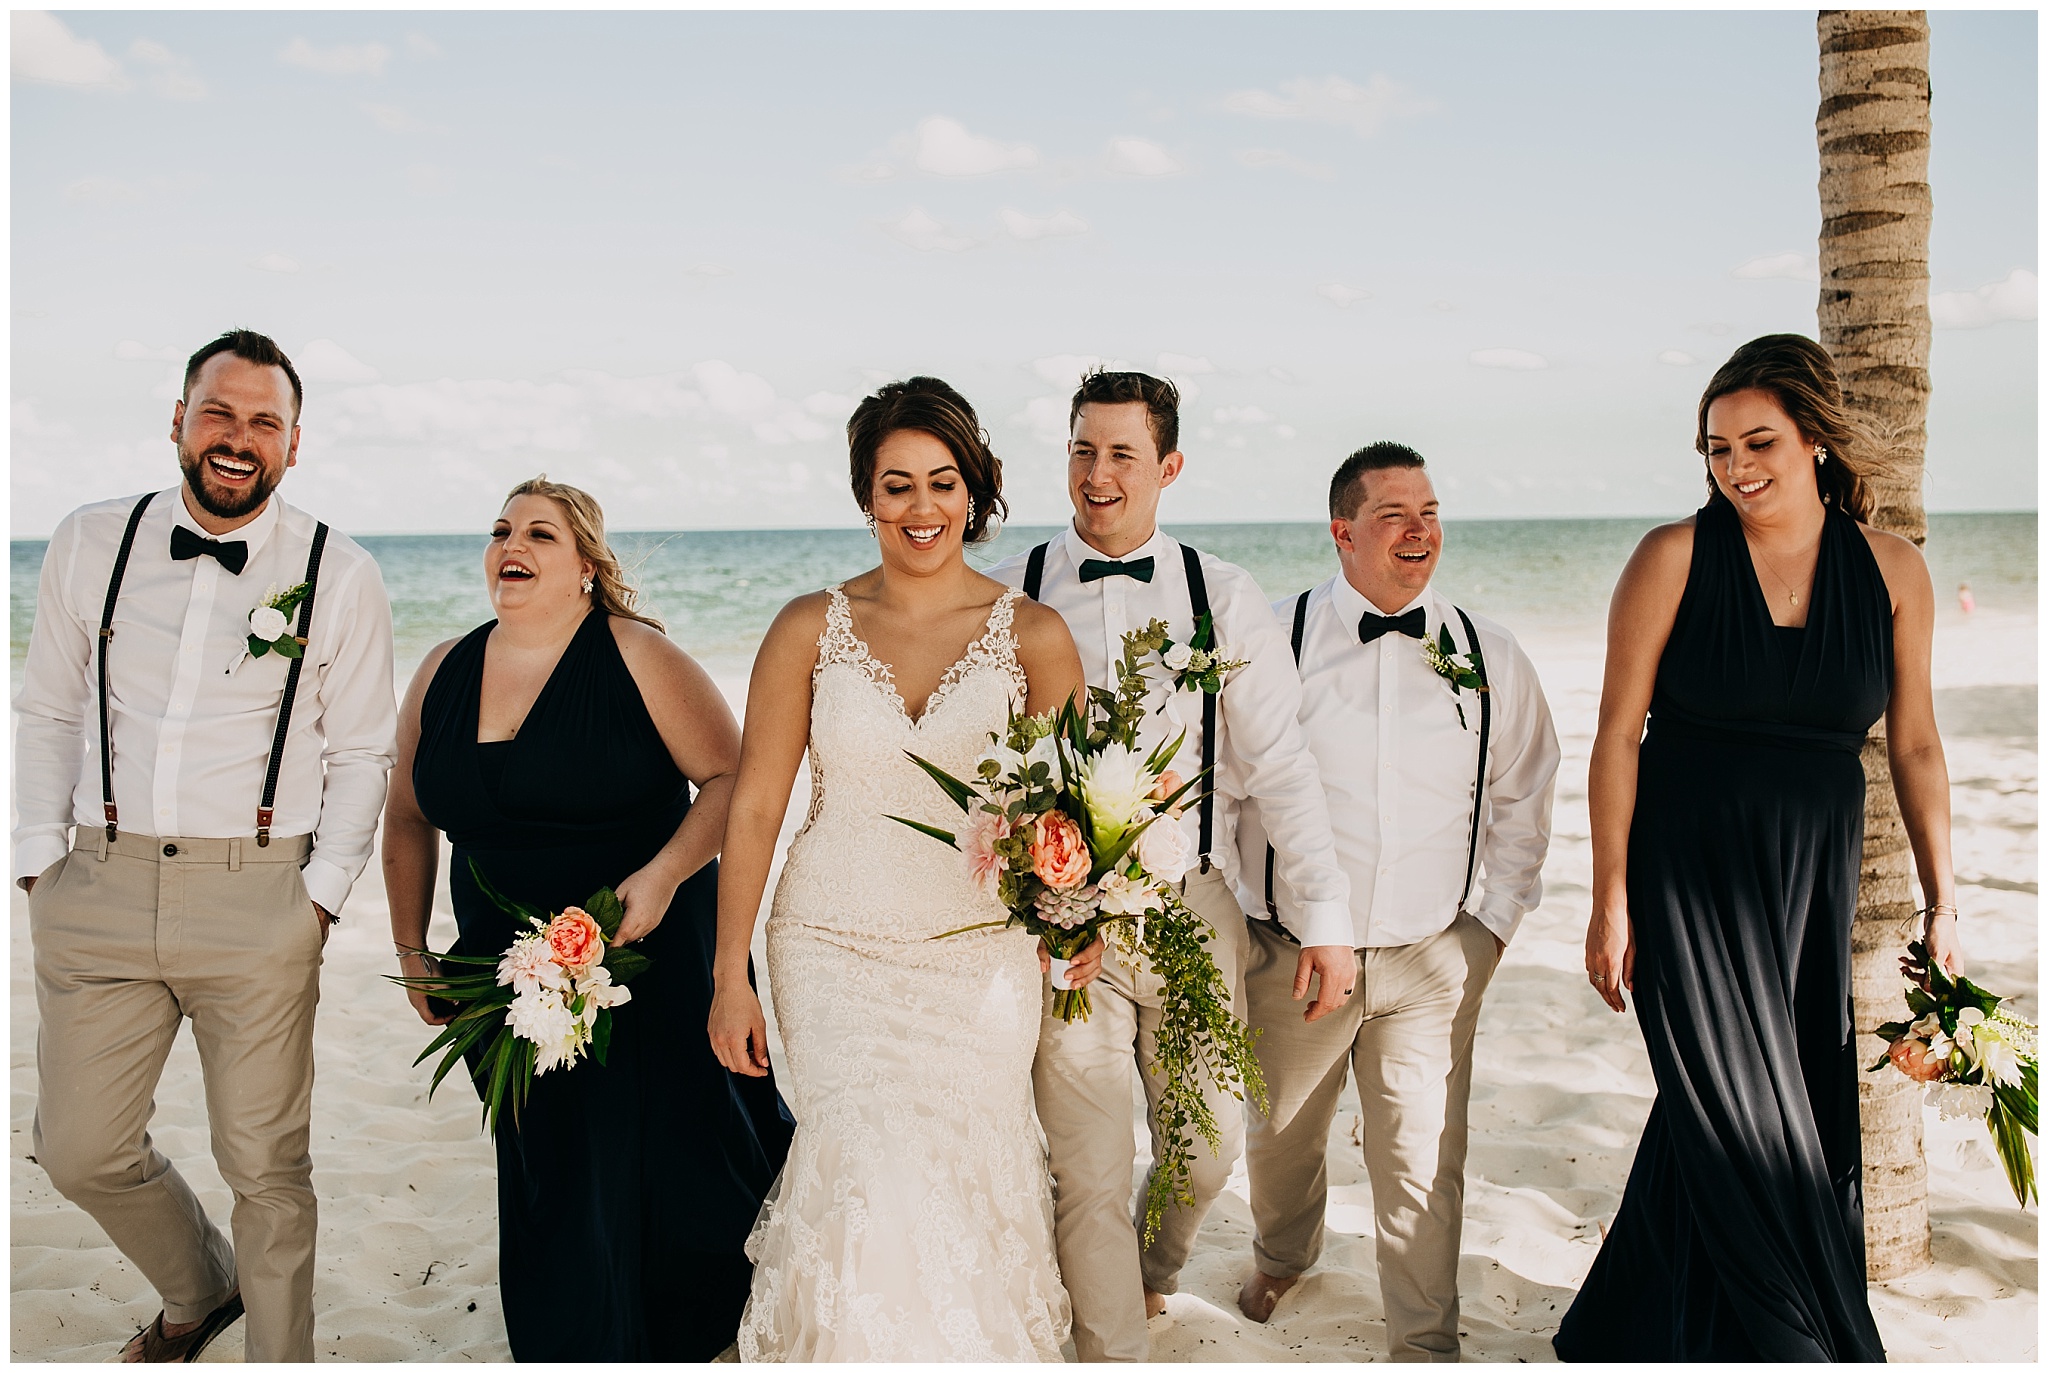 wedding party portrait on the beach at cancun mexico wedding